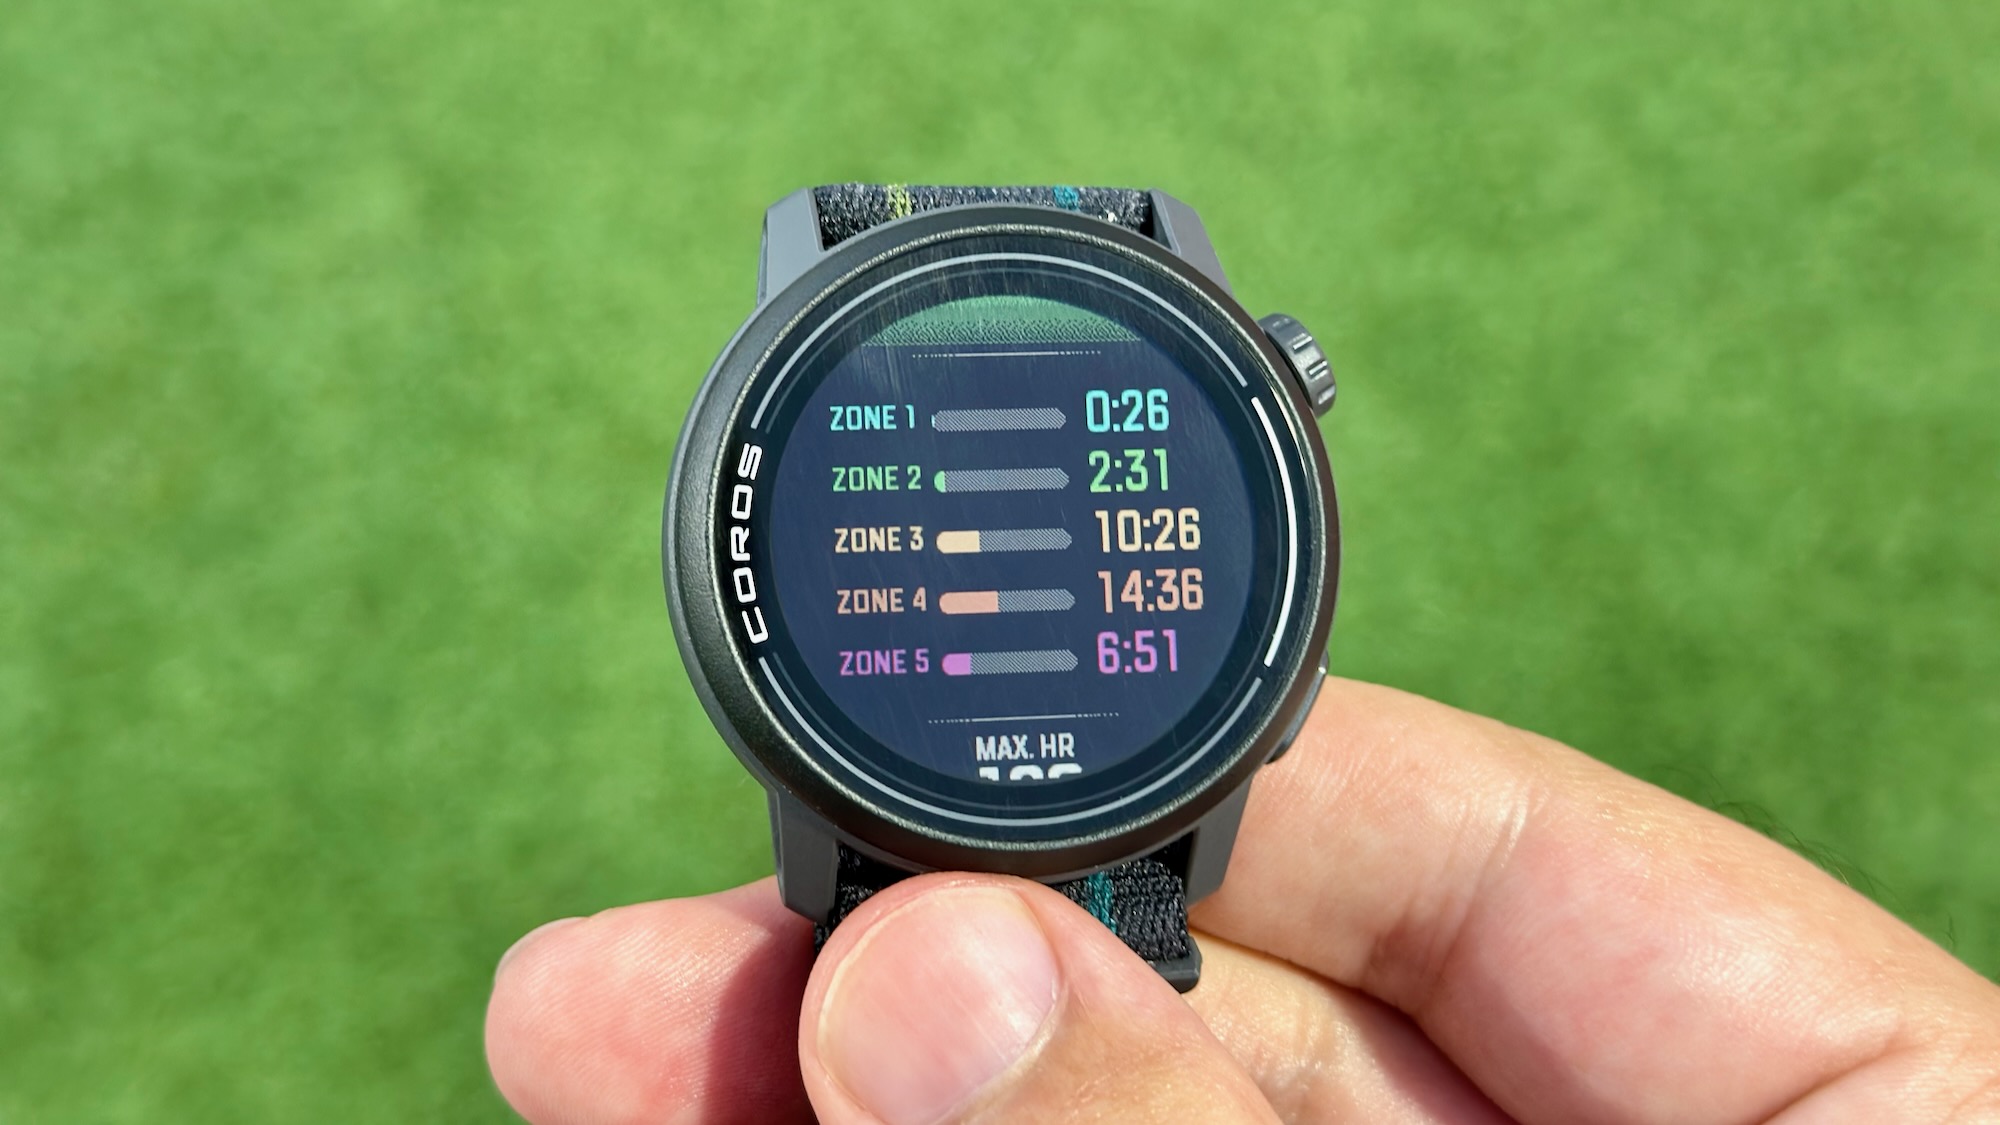 Post-workout heart rate zones on the COROS PACE 3